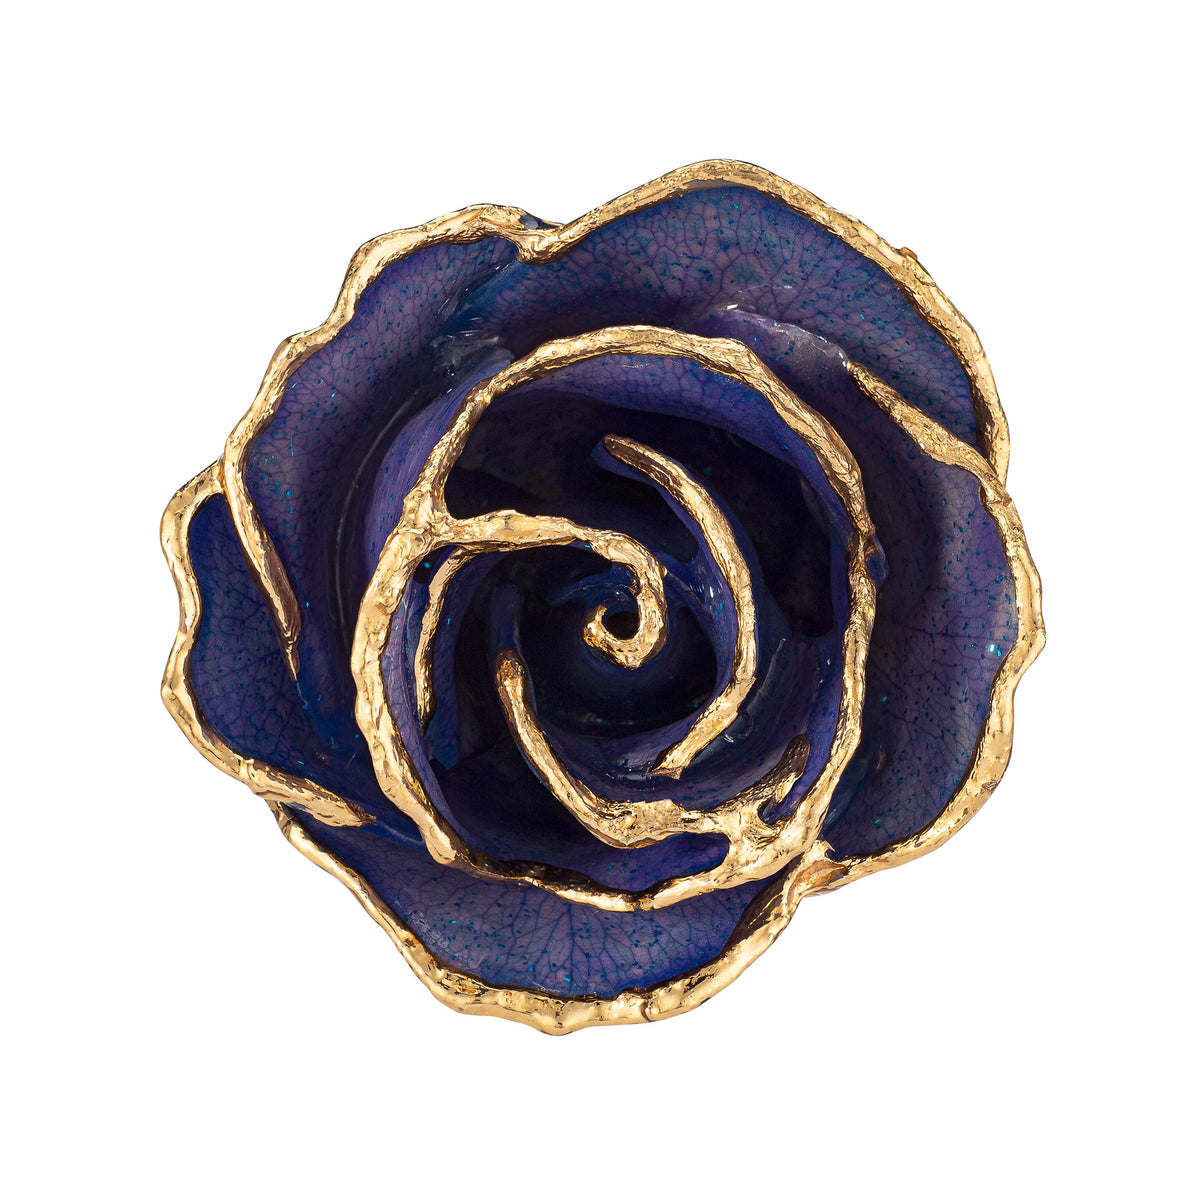 24K Gold Trimmed Forever Rose with Tanzanite (Purple, Lavender, and Blue color blend) Petals with Sapphire Blue Suspended Sparkles. View of Stem, Leaves, and Rose Petals and Showing Detail of Gold Trim view looking down into rose.